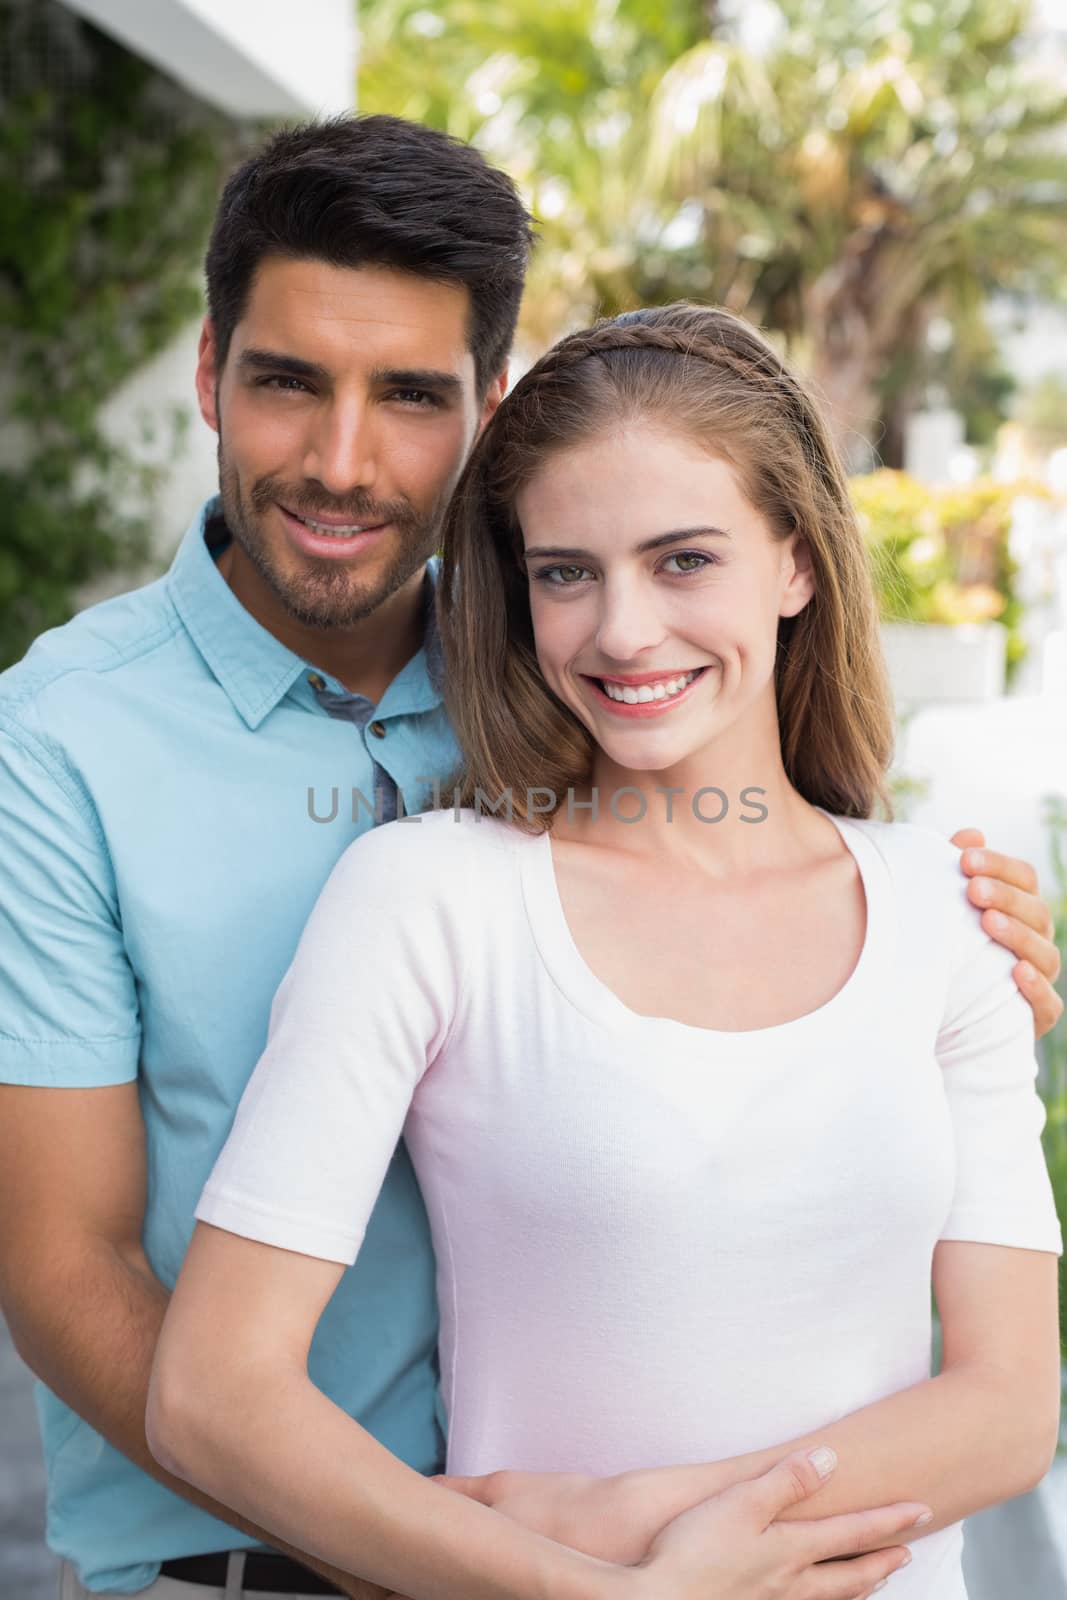 Portrait of a loving young man embracing woman from behind outdoors